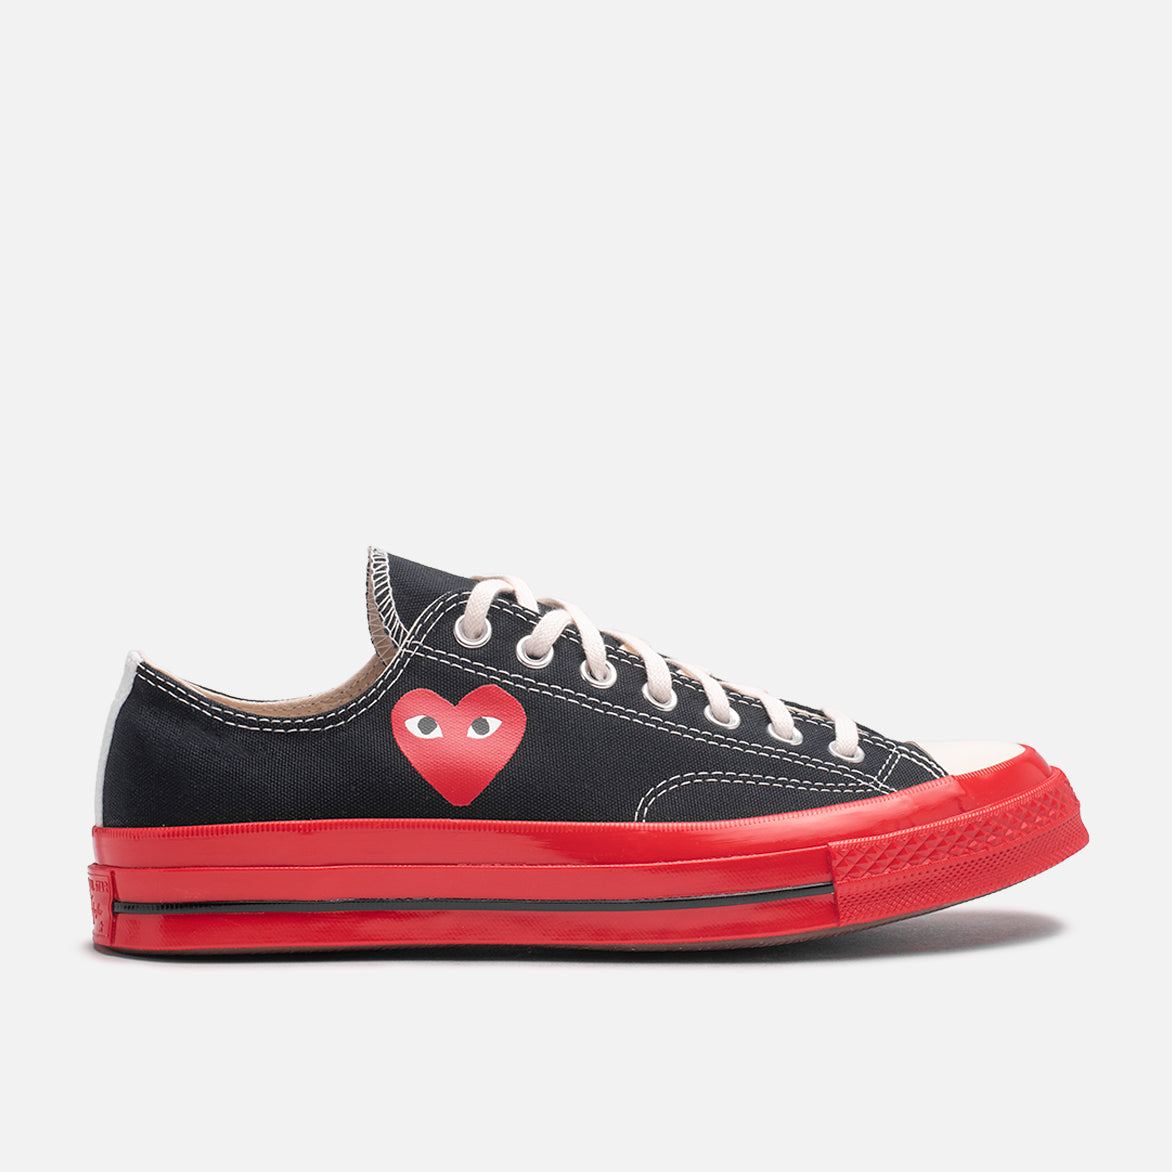 Converse Chuck Taylor All Star 70 Ox Comme des Garcons PLAY Black